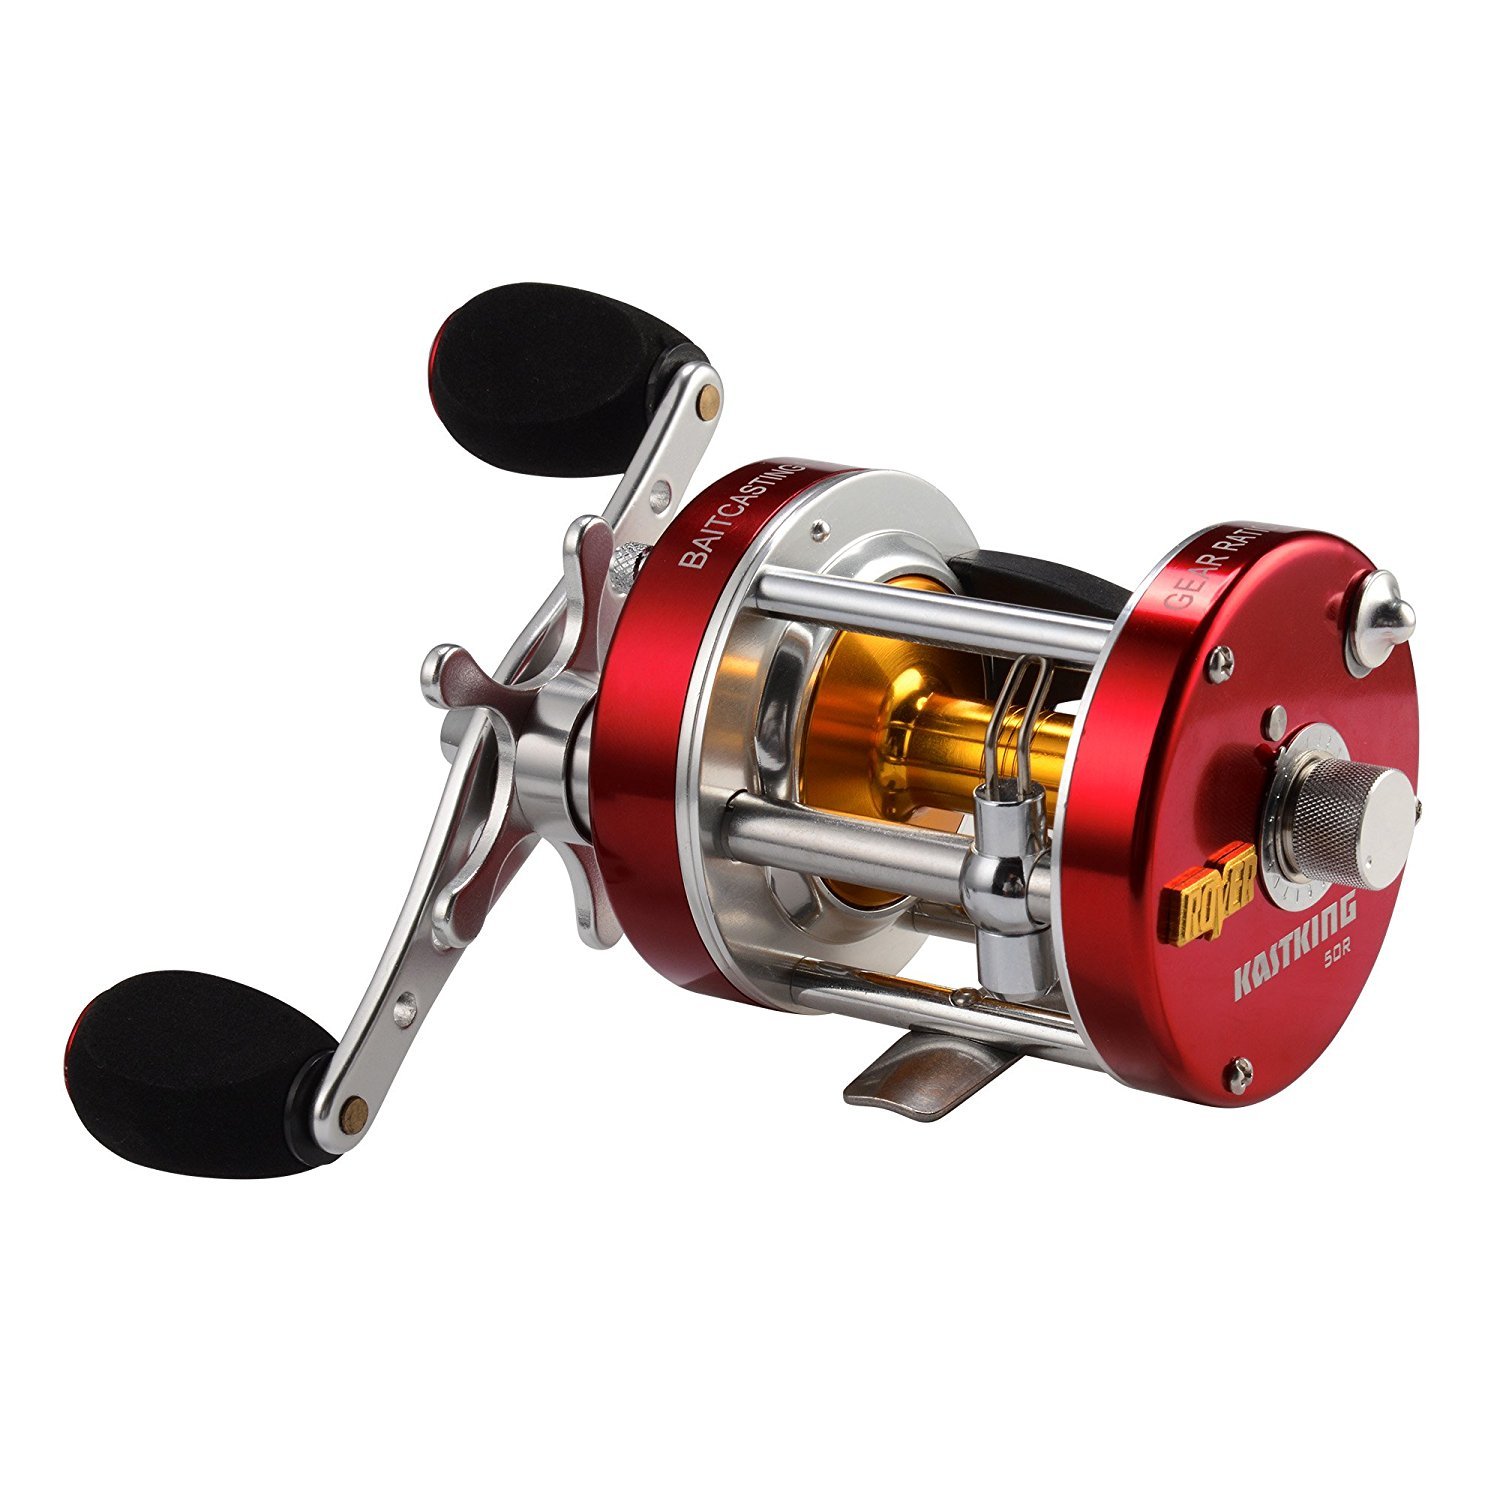 KastKing Rover Round Baitcasting Reel, Perfect Conventional Reel for  Catfish, Salmon/Steelhead, Striper Bass and Inshore Saltwater Fishing -  No.1 Highest Rated Conventional Reel, Reinforced Metal Body A: Right-Rover60